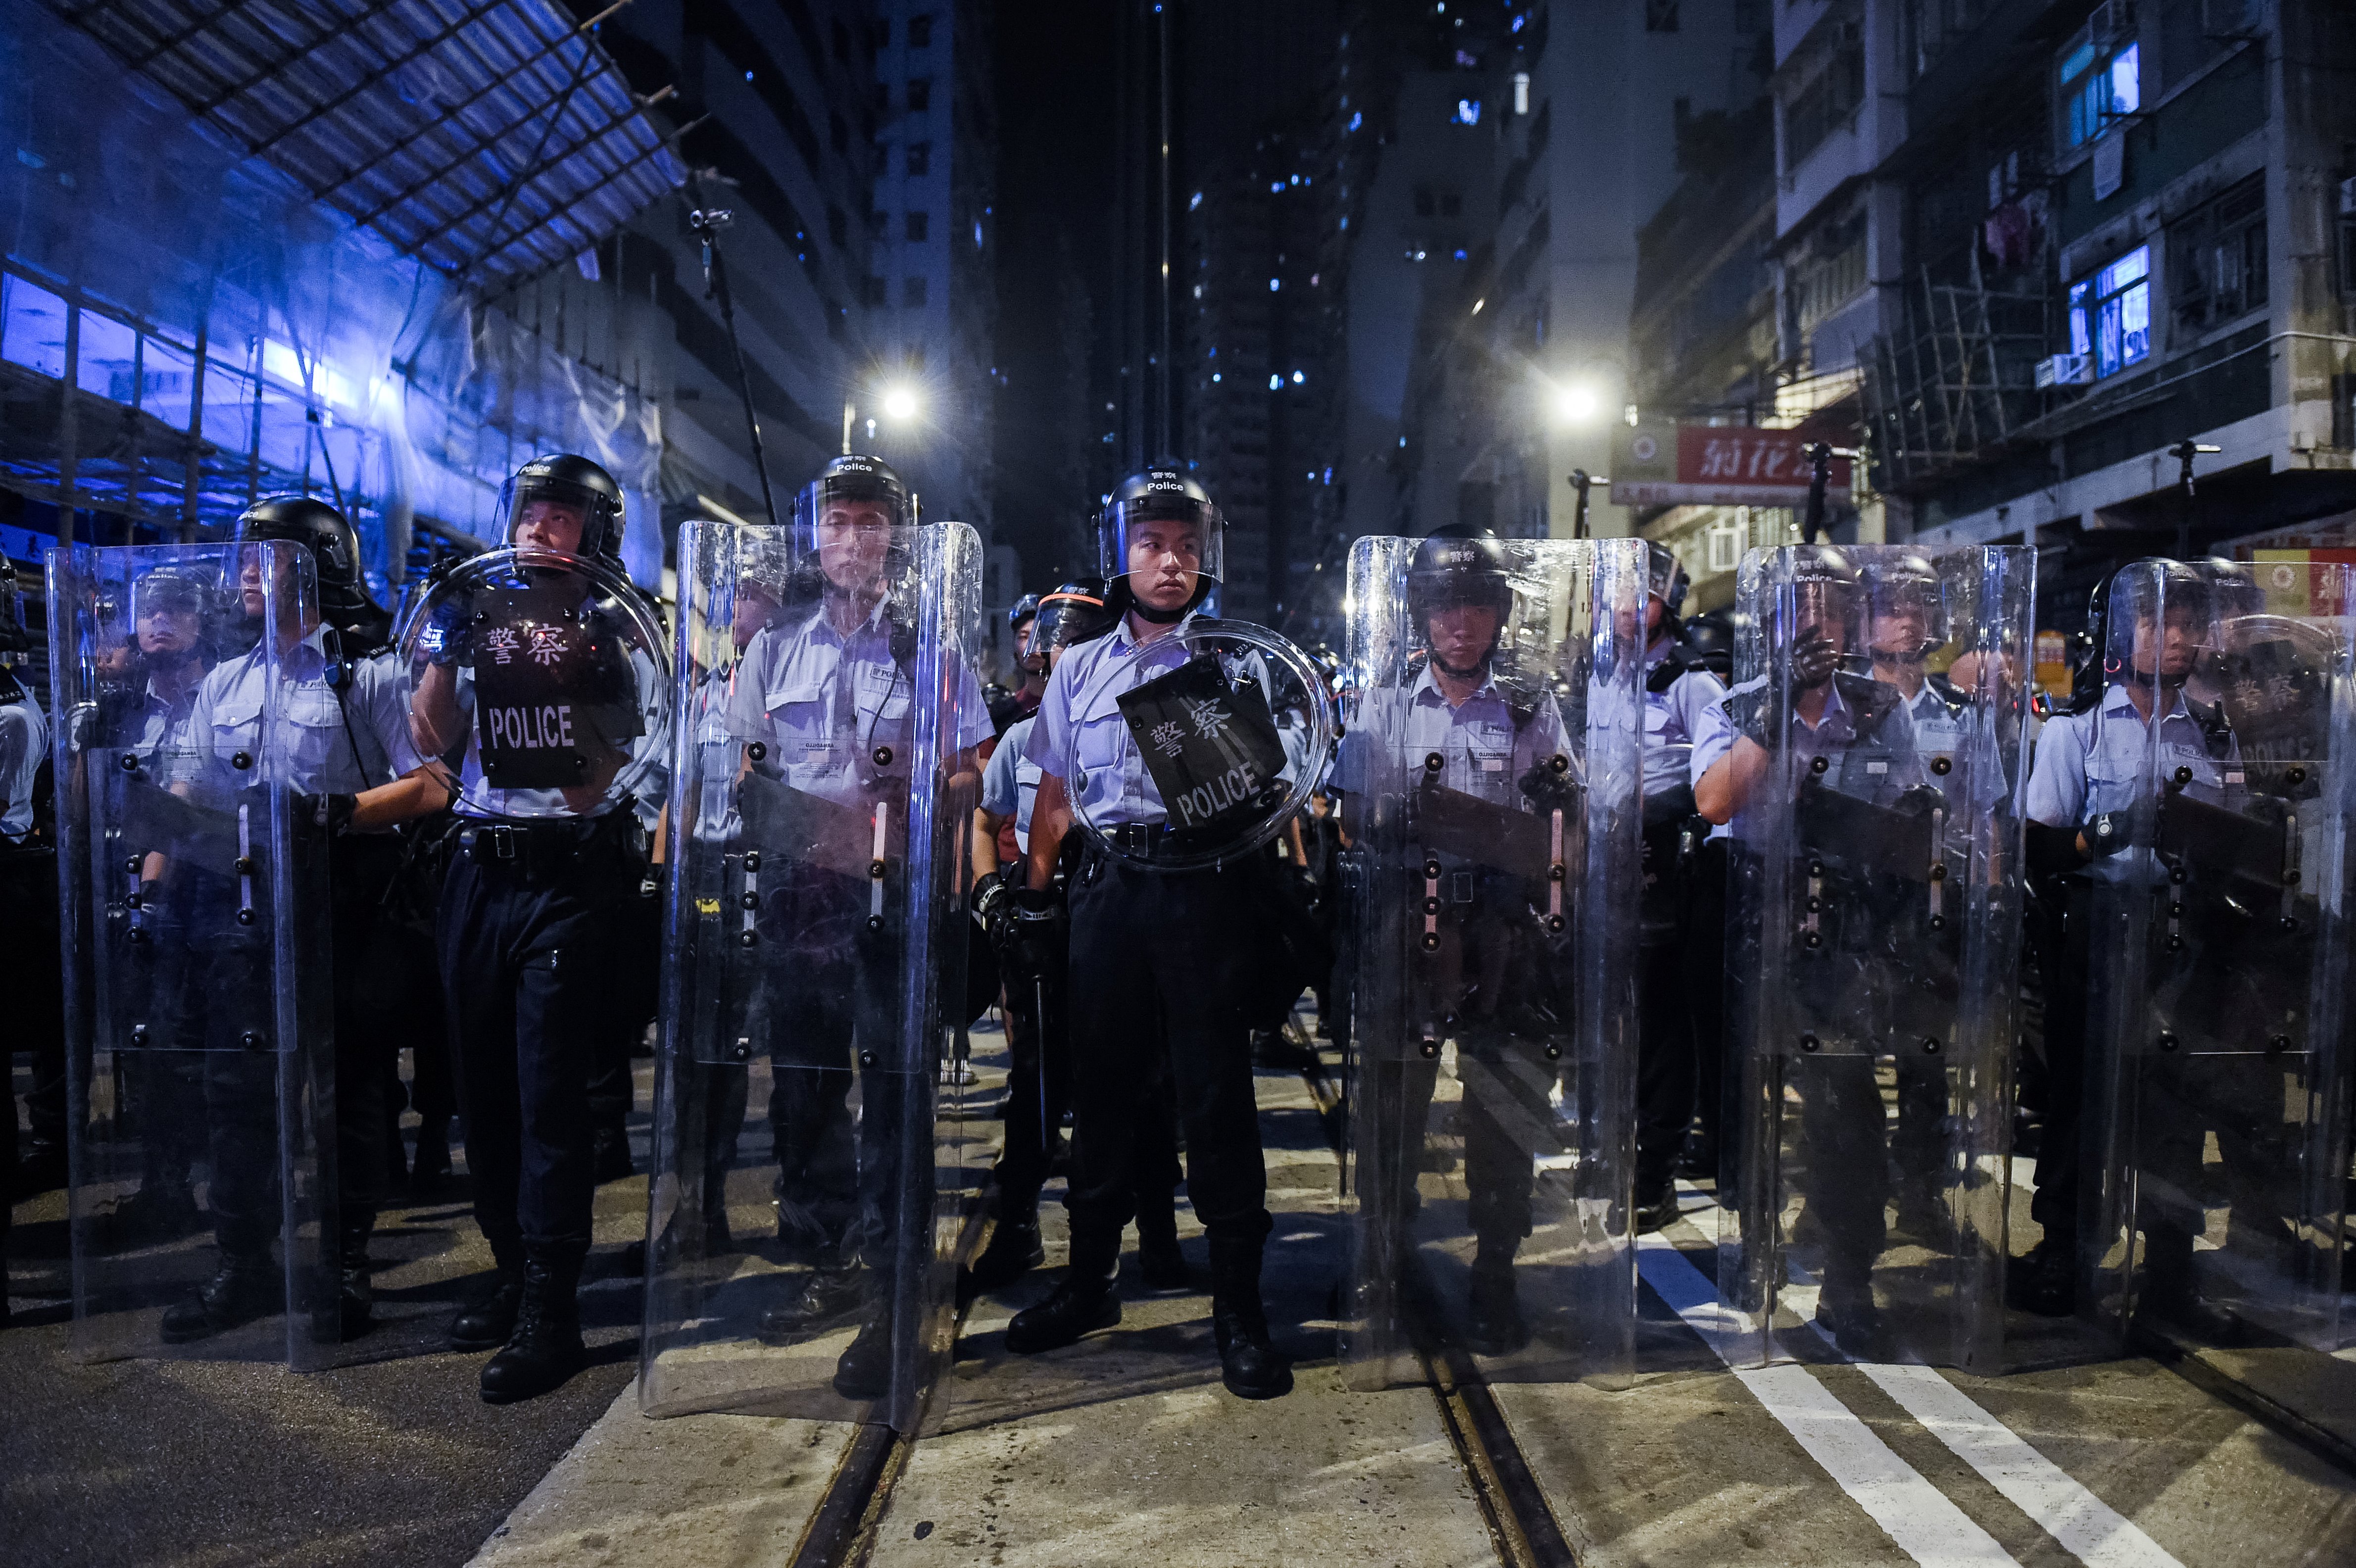 Riot police stand guard during a protest in Hong Kong early on Nov. 7, 2016 (Anthony Wallace—AFP/Getty Images)